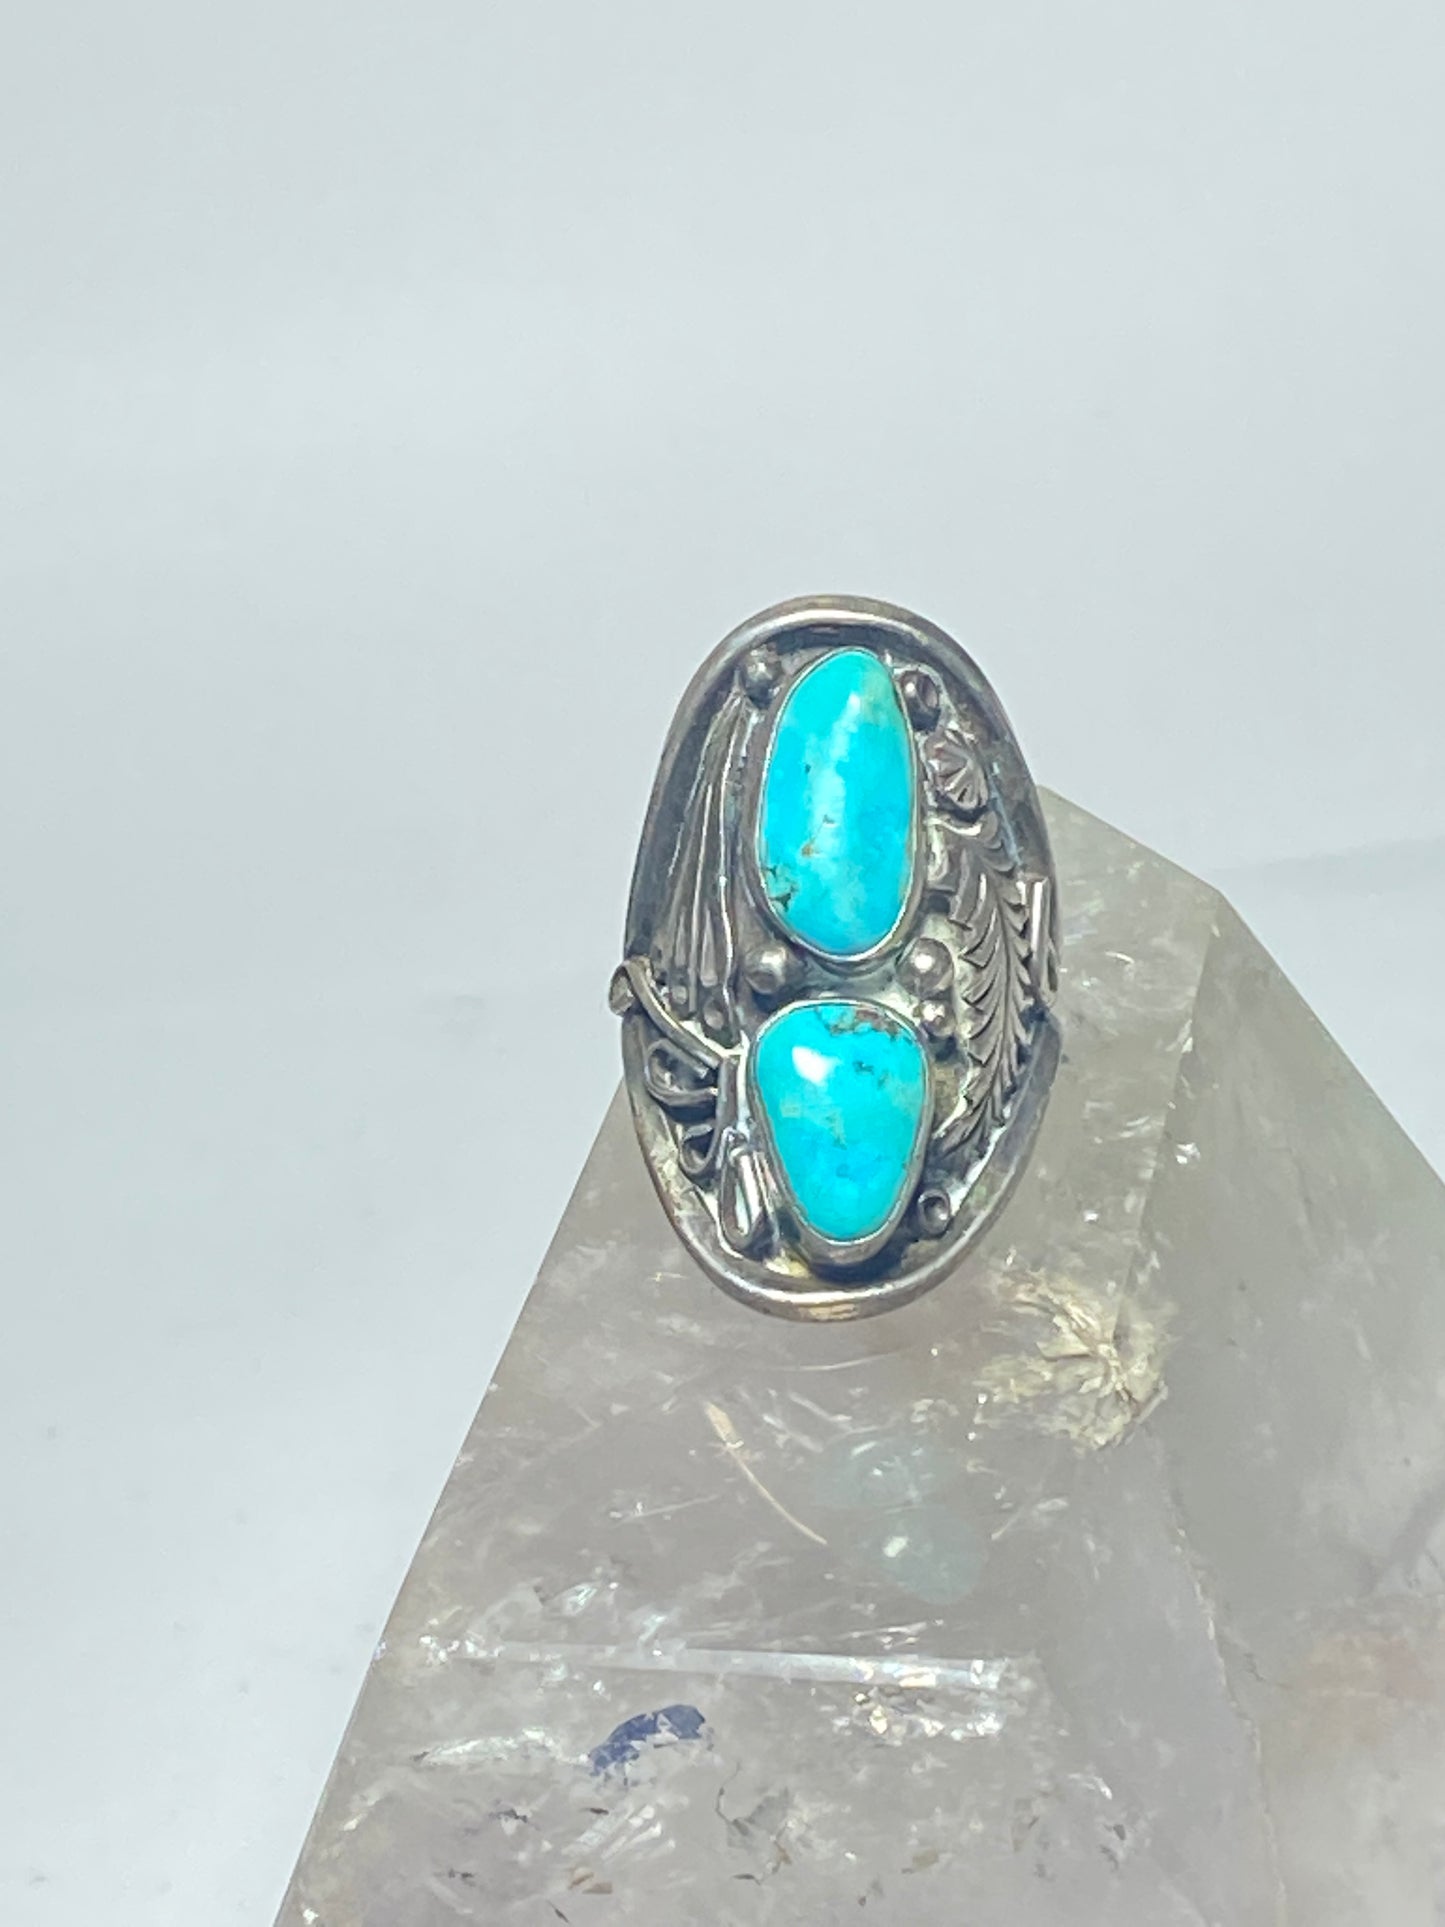 Turquoise ring Navajo knuckle sterling silver men women